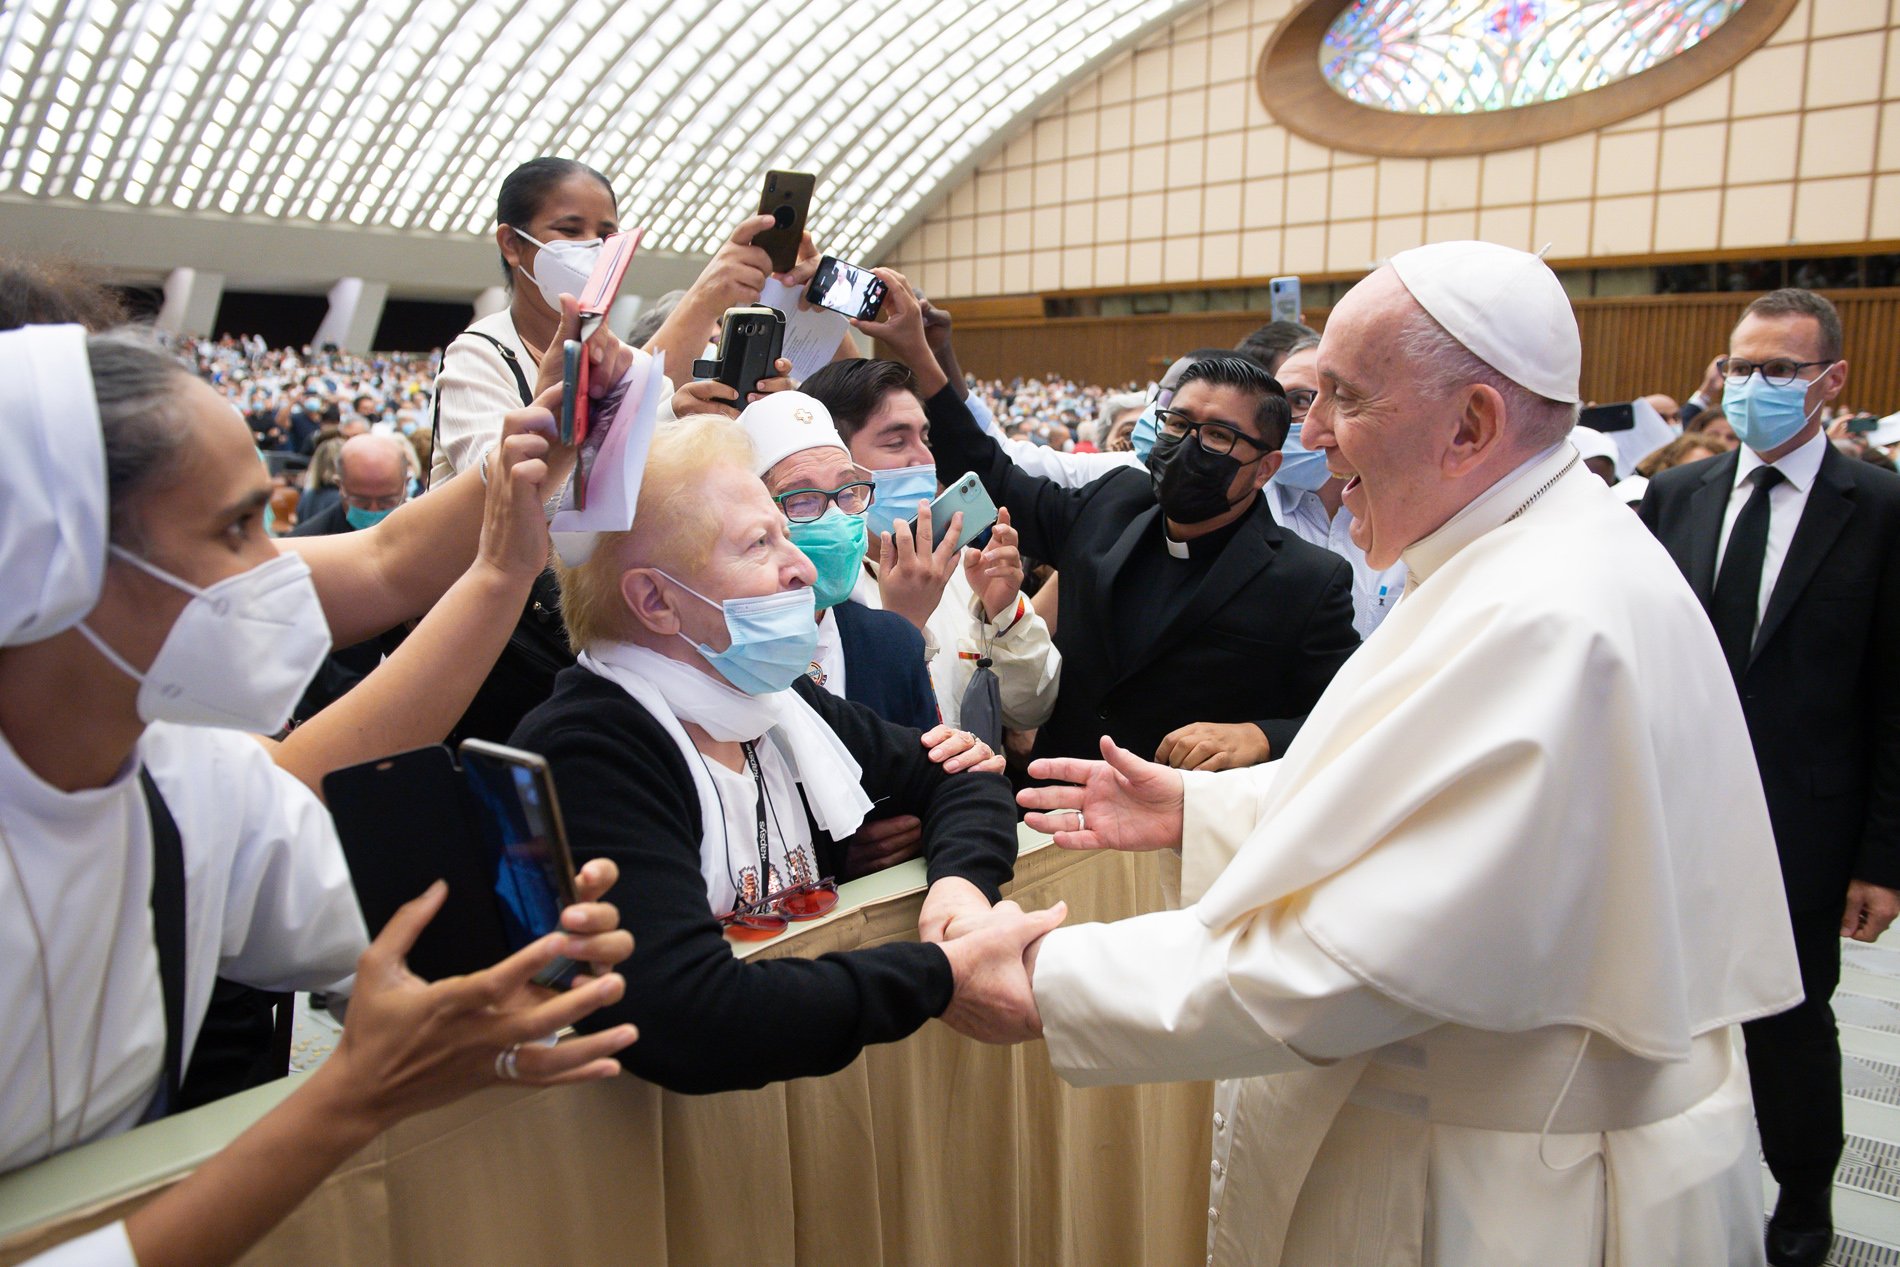 Pope Francis greets people during an audience with the faithful from the Diocese of Rome at the Vatican Sept. 18, 2021. (CNS photo/Vatican Media)